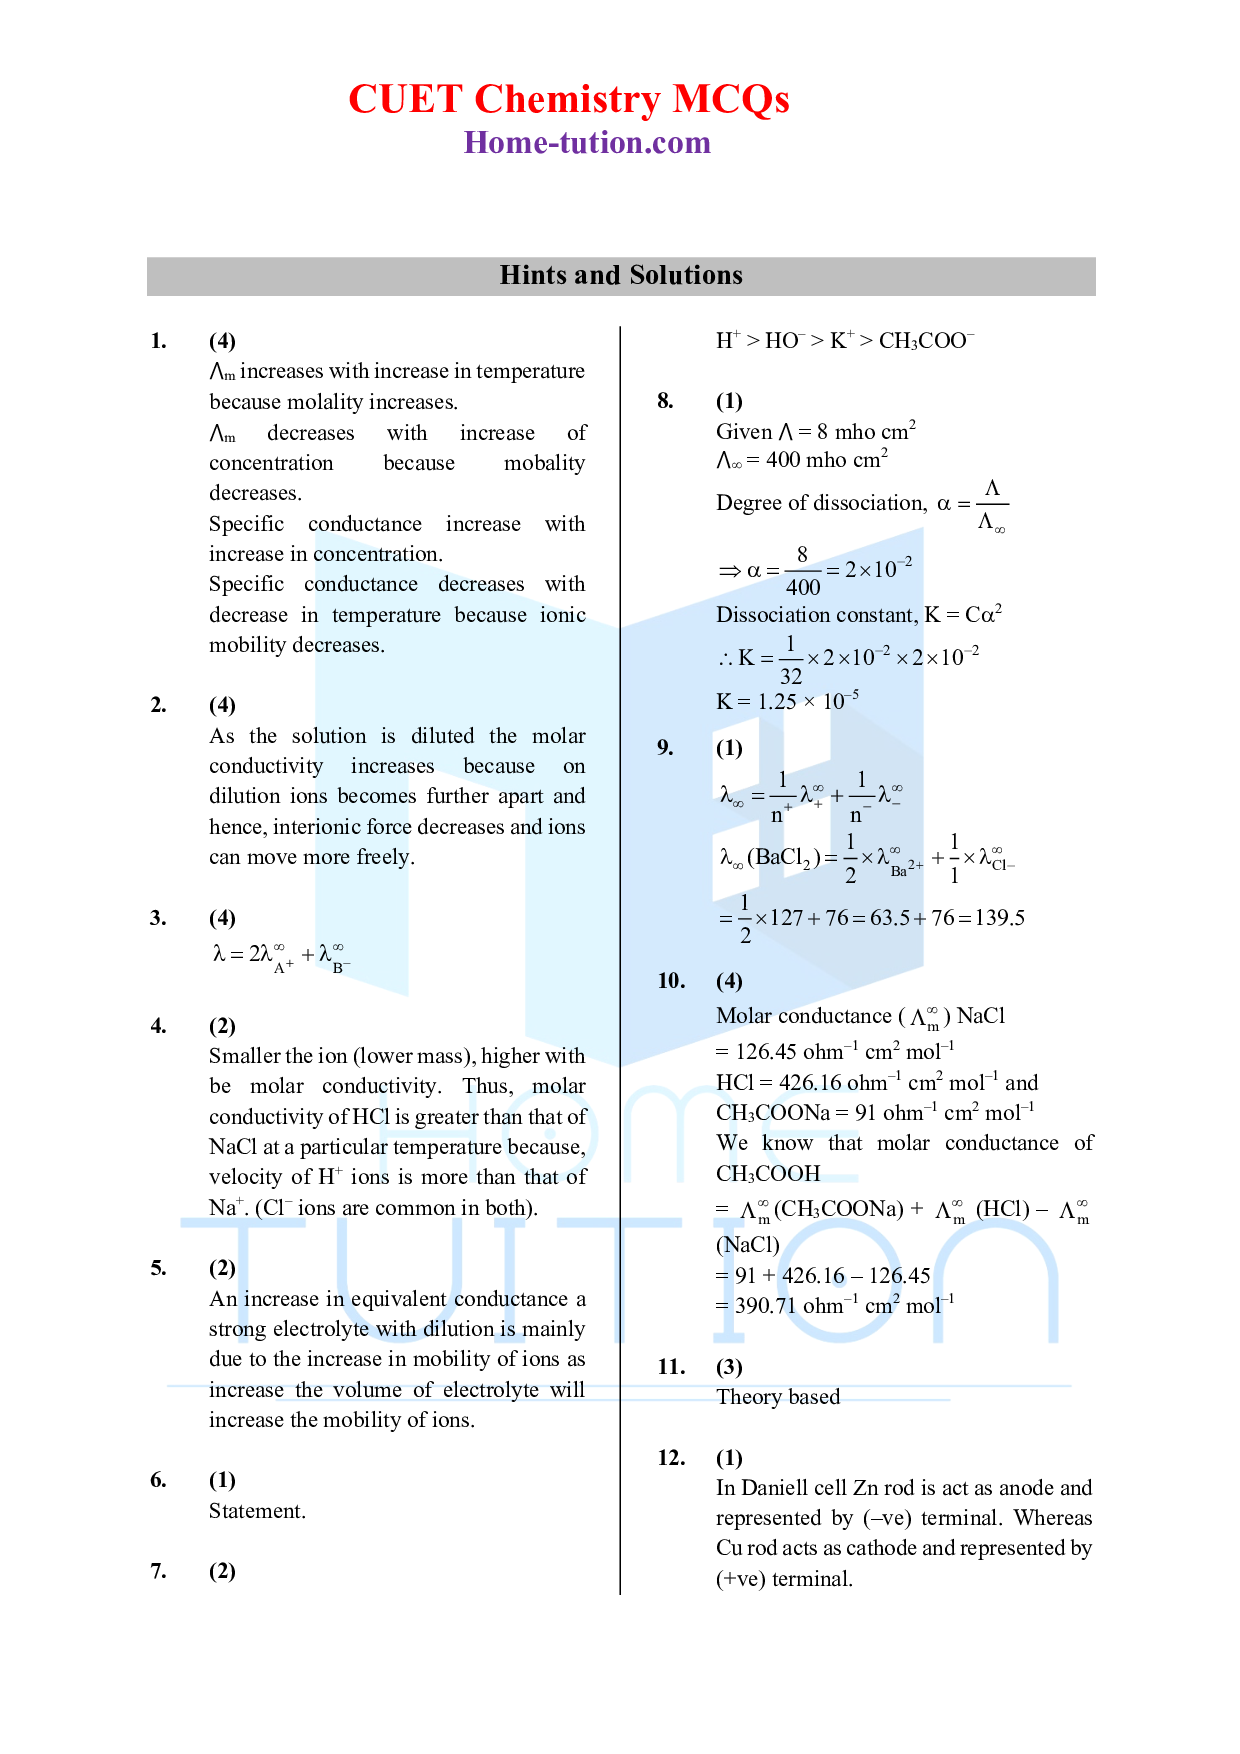 CUET MCQ Questions For Chapter-03 Electrochemistry